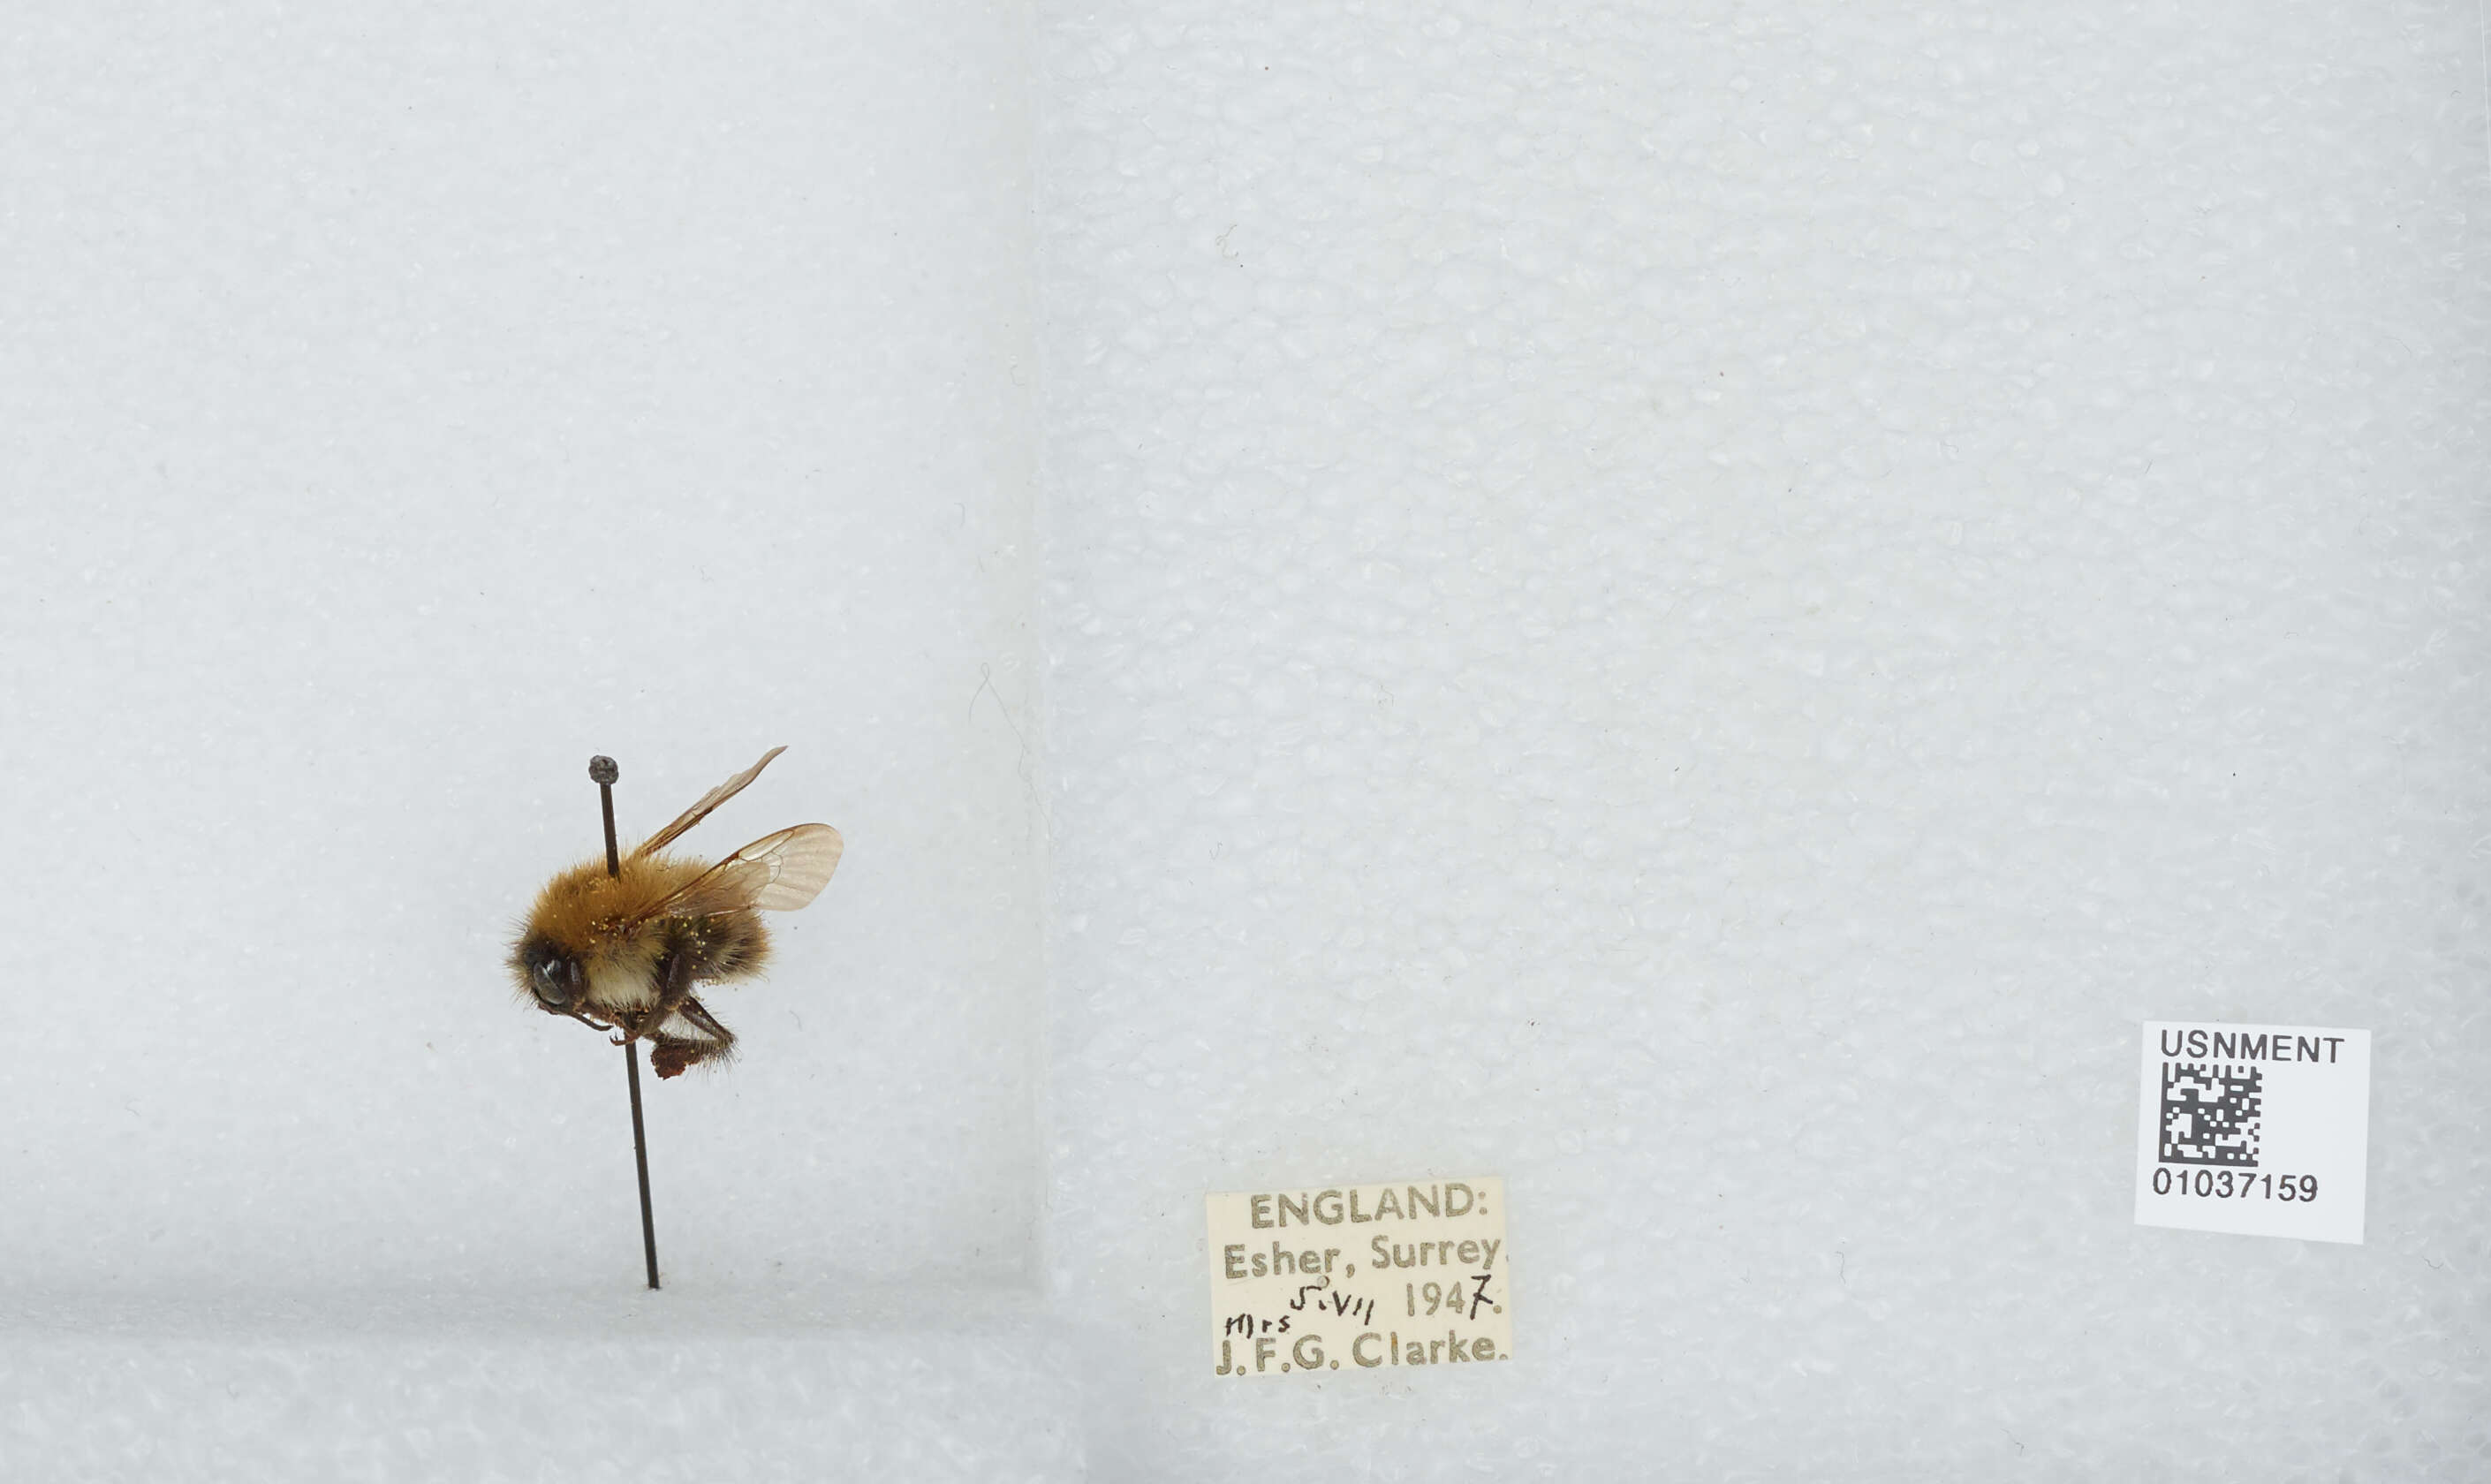 Image of Common carder bumblebee